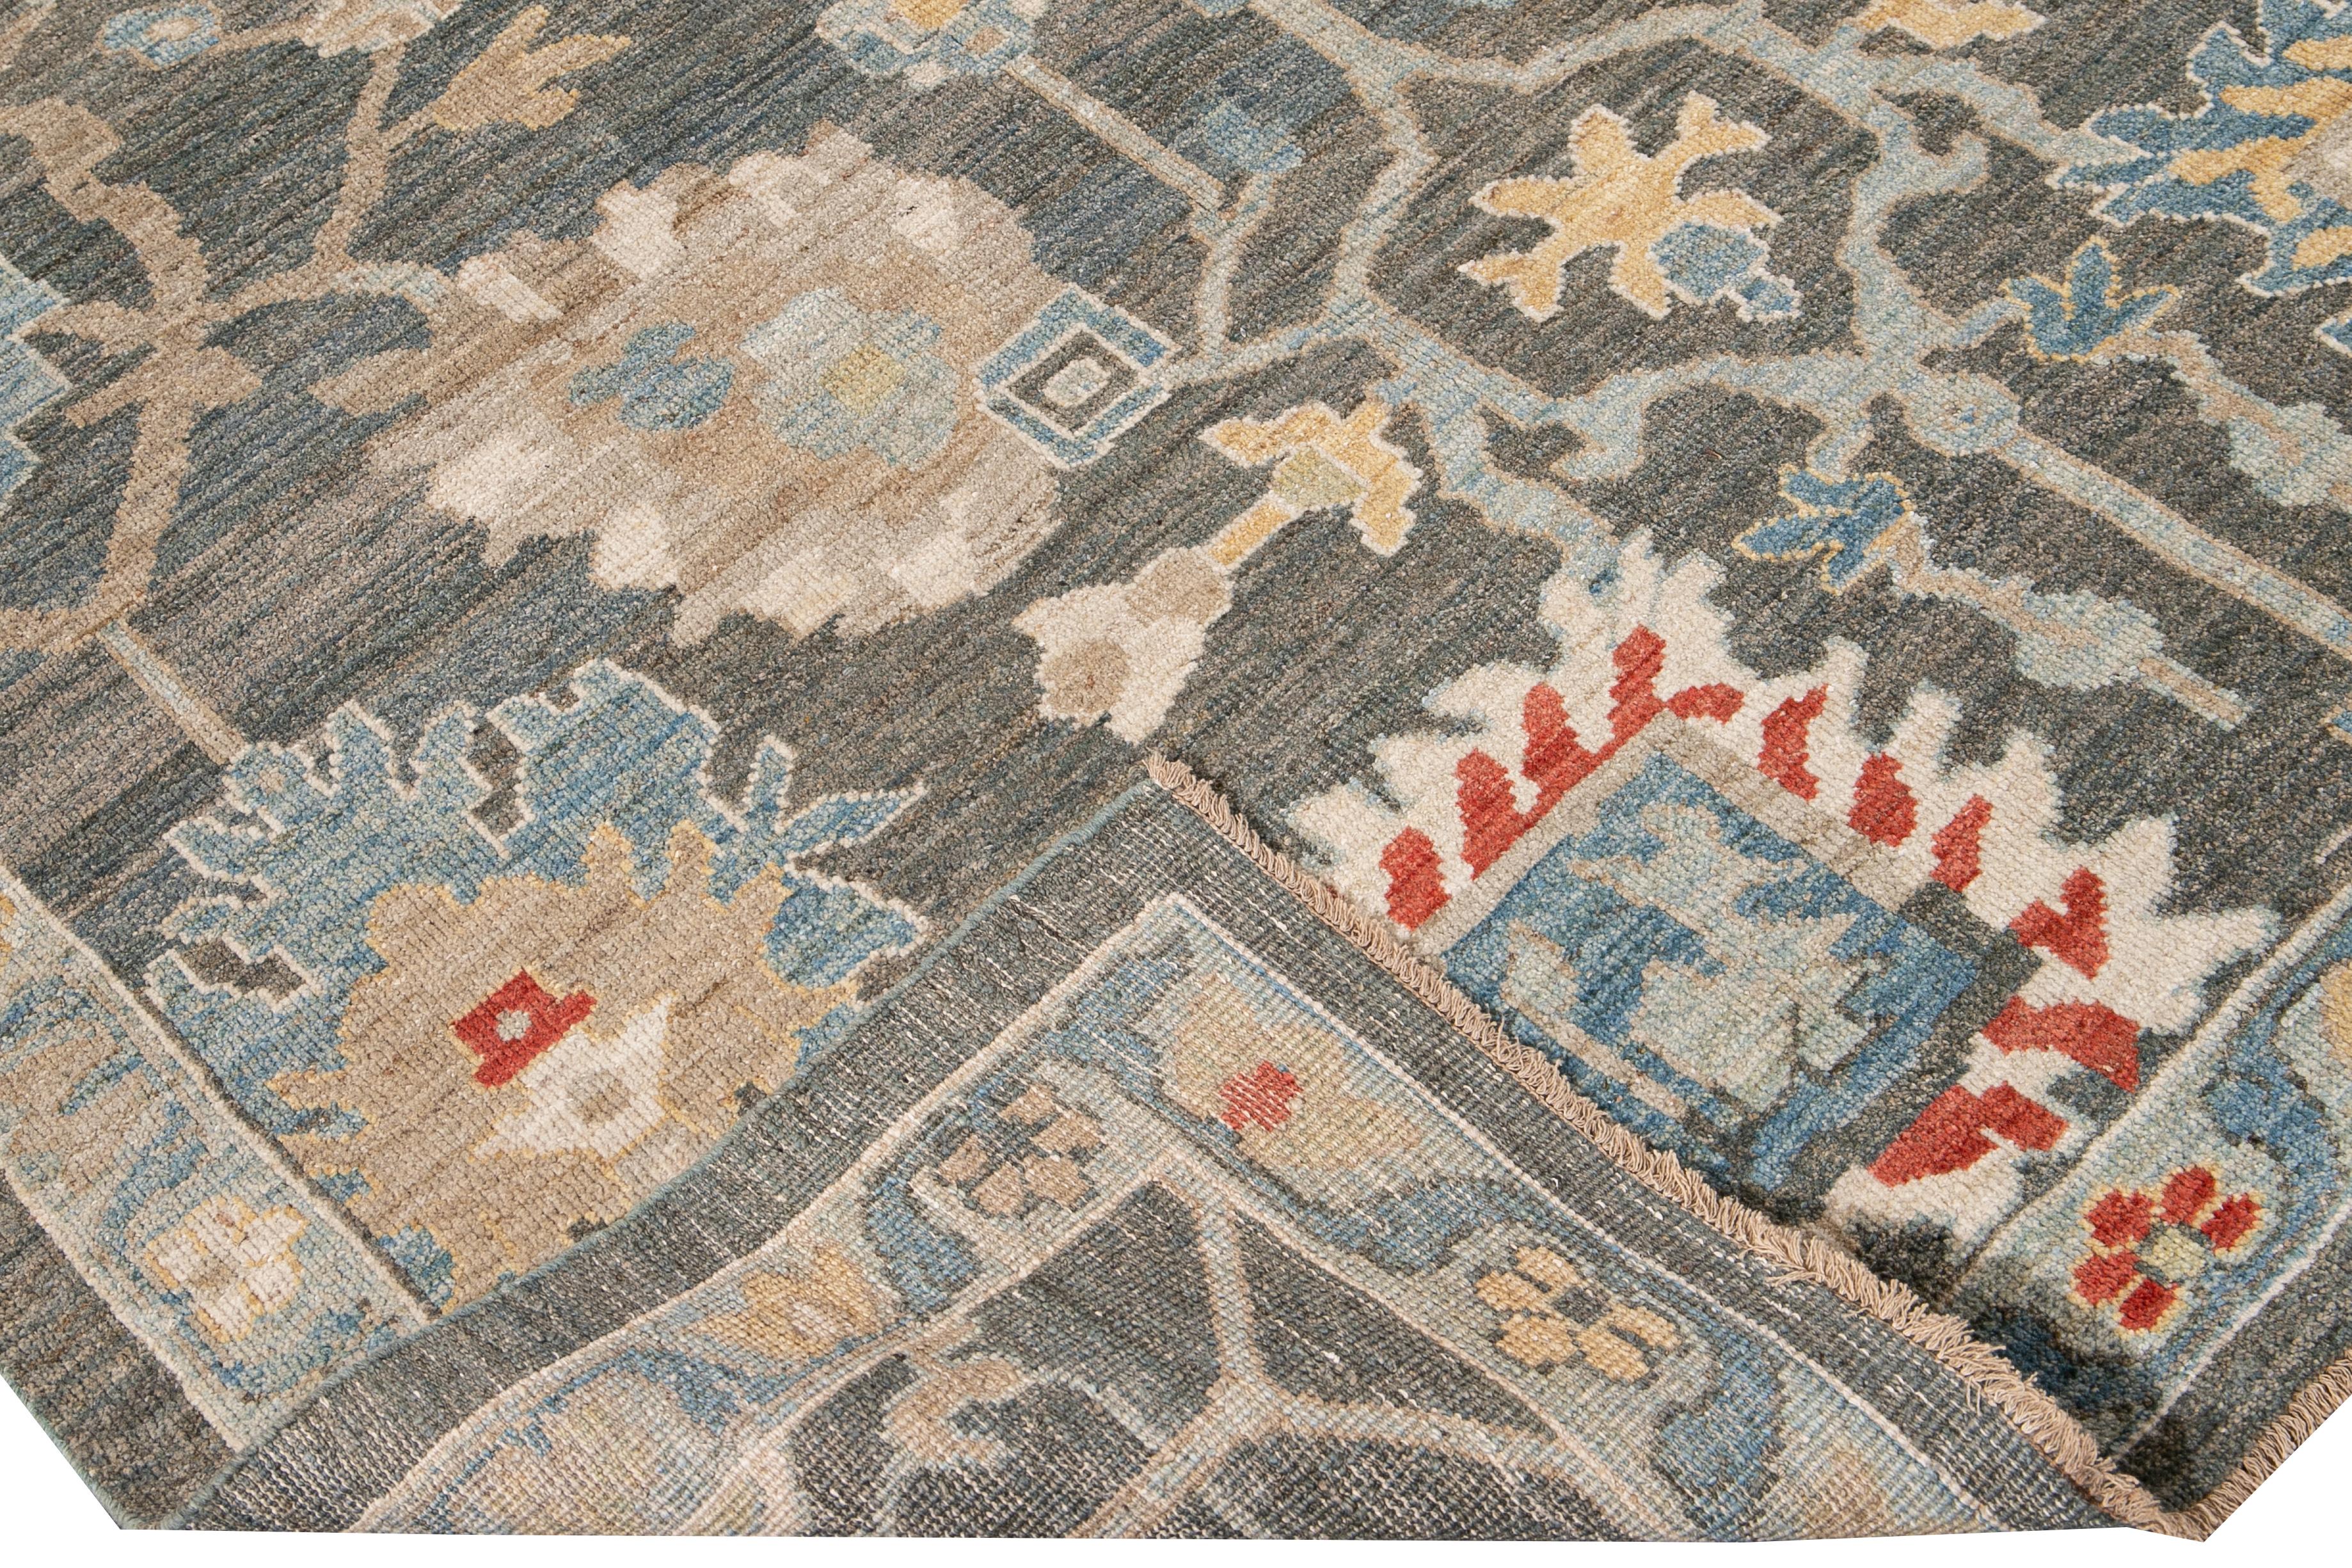 Beautiful modern Sultanabad hand-knotted wool rug with a gray field. This Sultanabad rug has an ivory, yellow, blue, and orange accent in a gorgeous all-over Classic geometric floral design.

This rug measures: 8'8